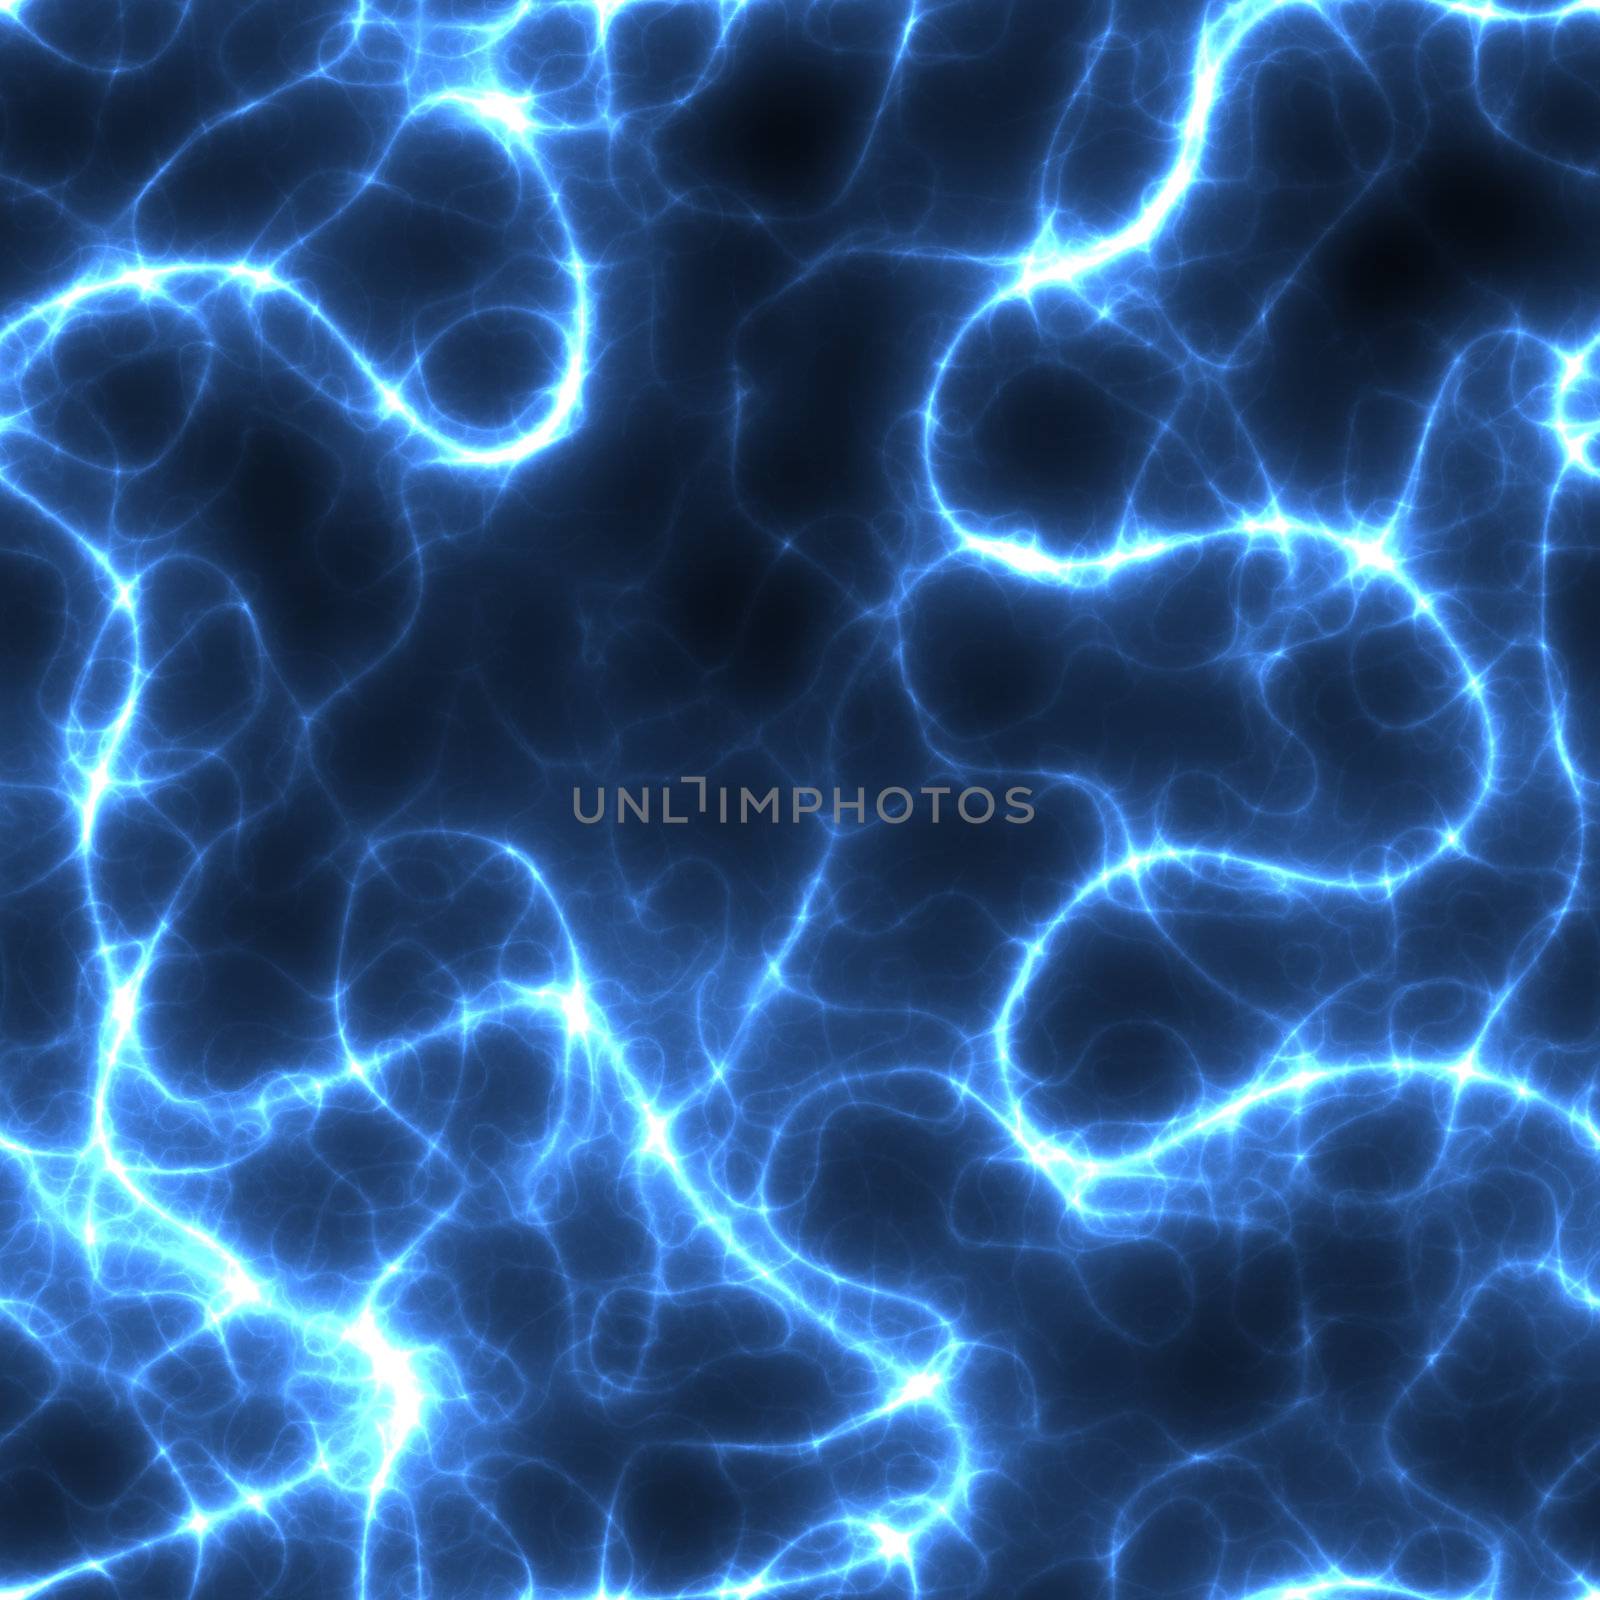 large abstract image of electricity or lightning